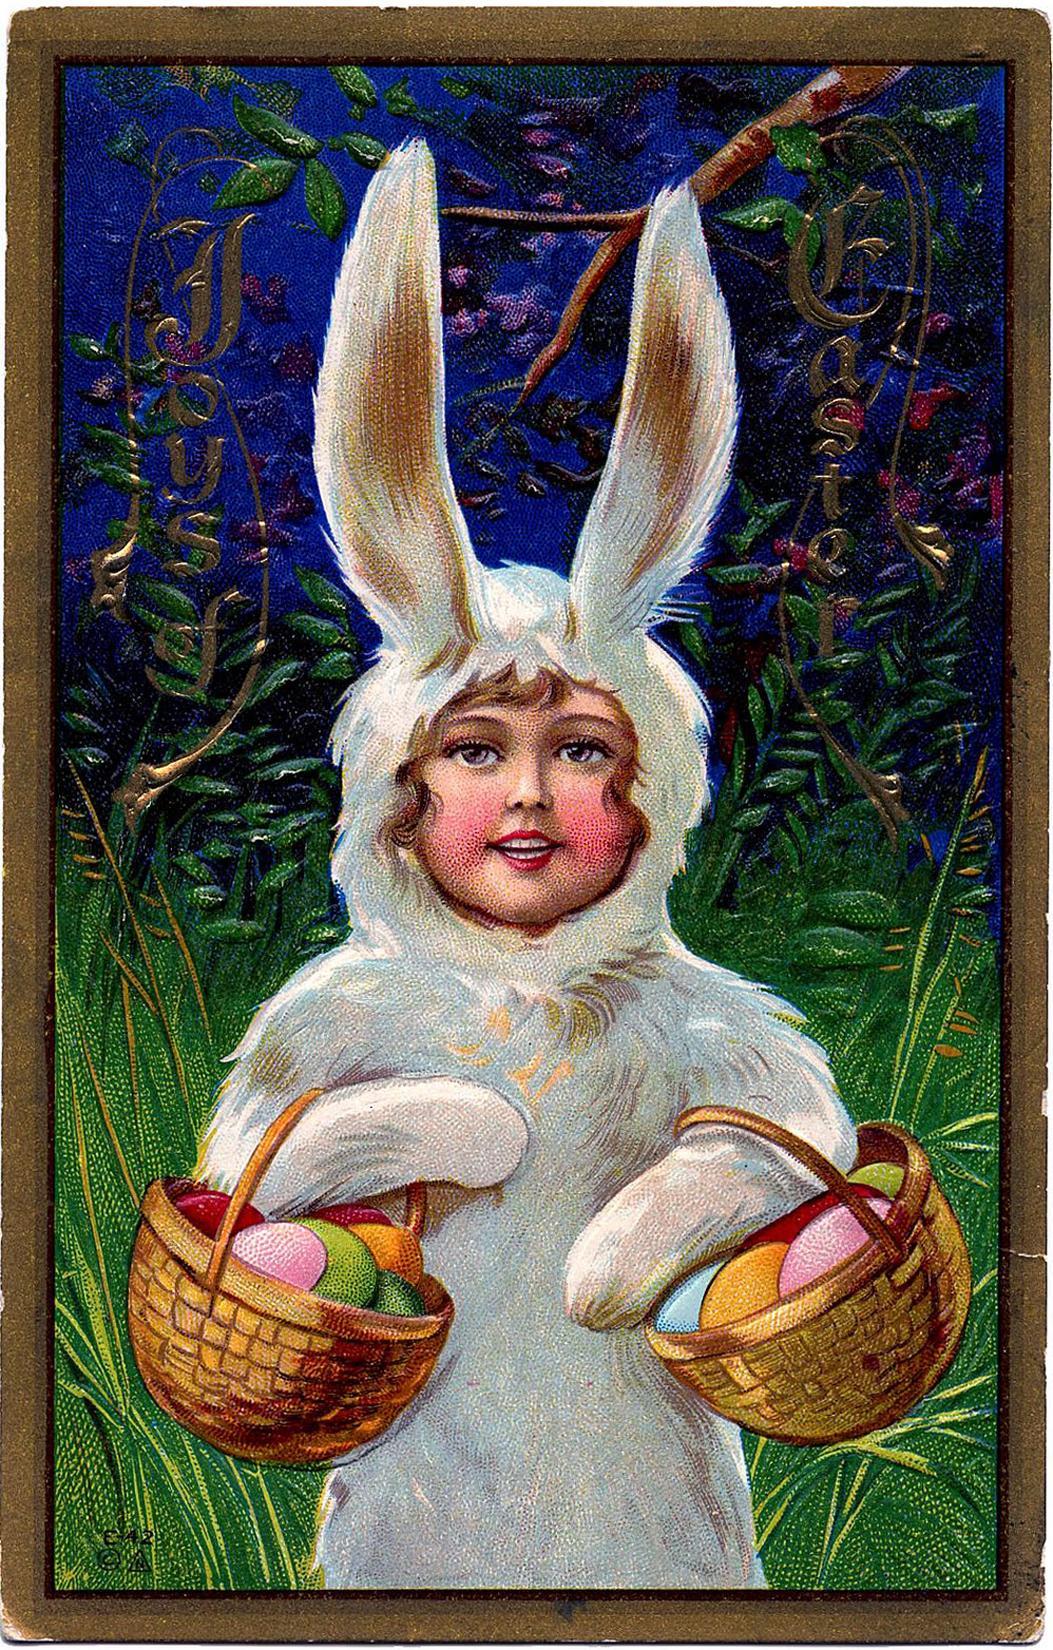 Easter Bunny Image Free